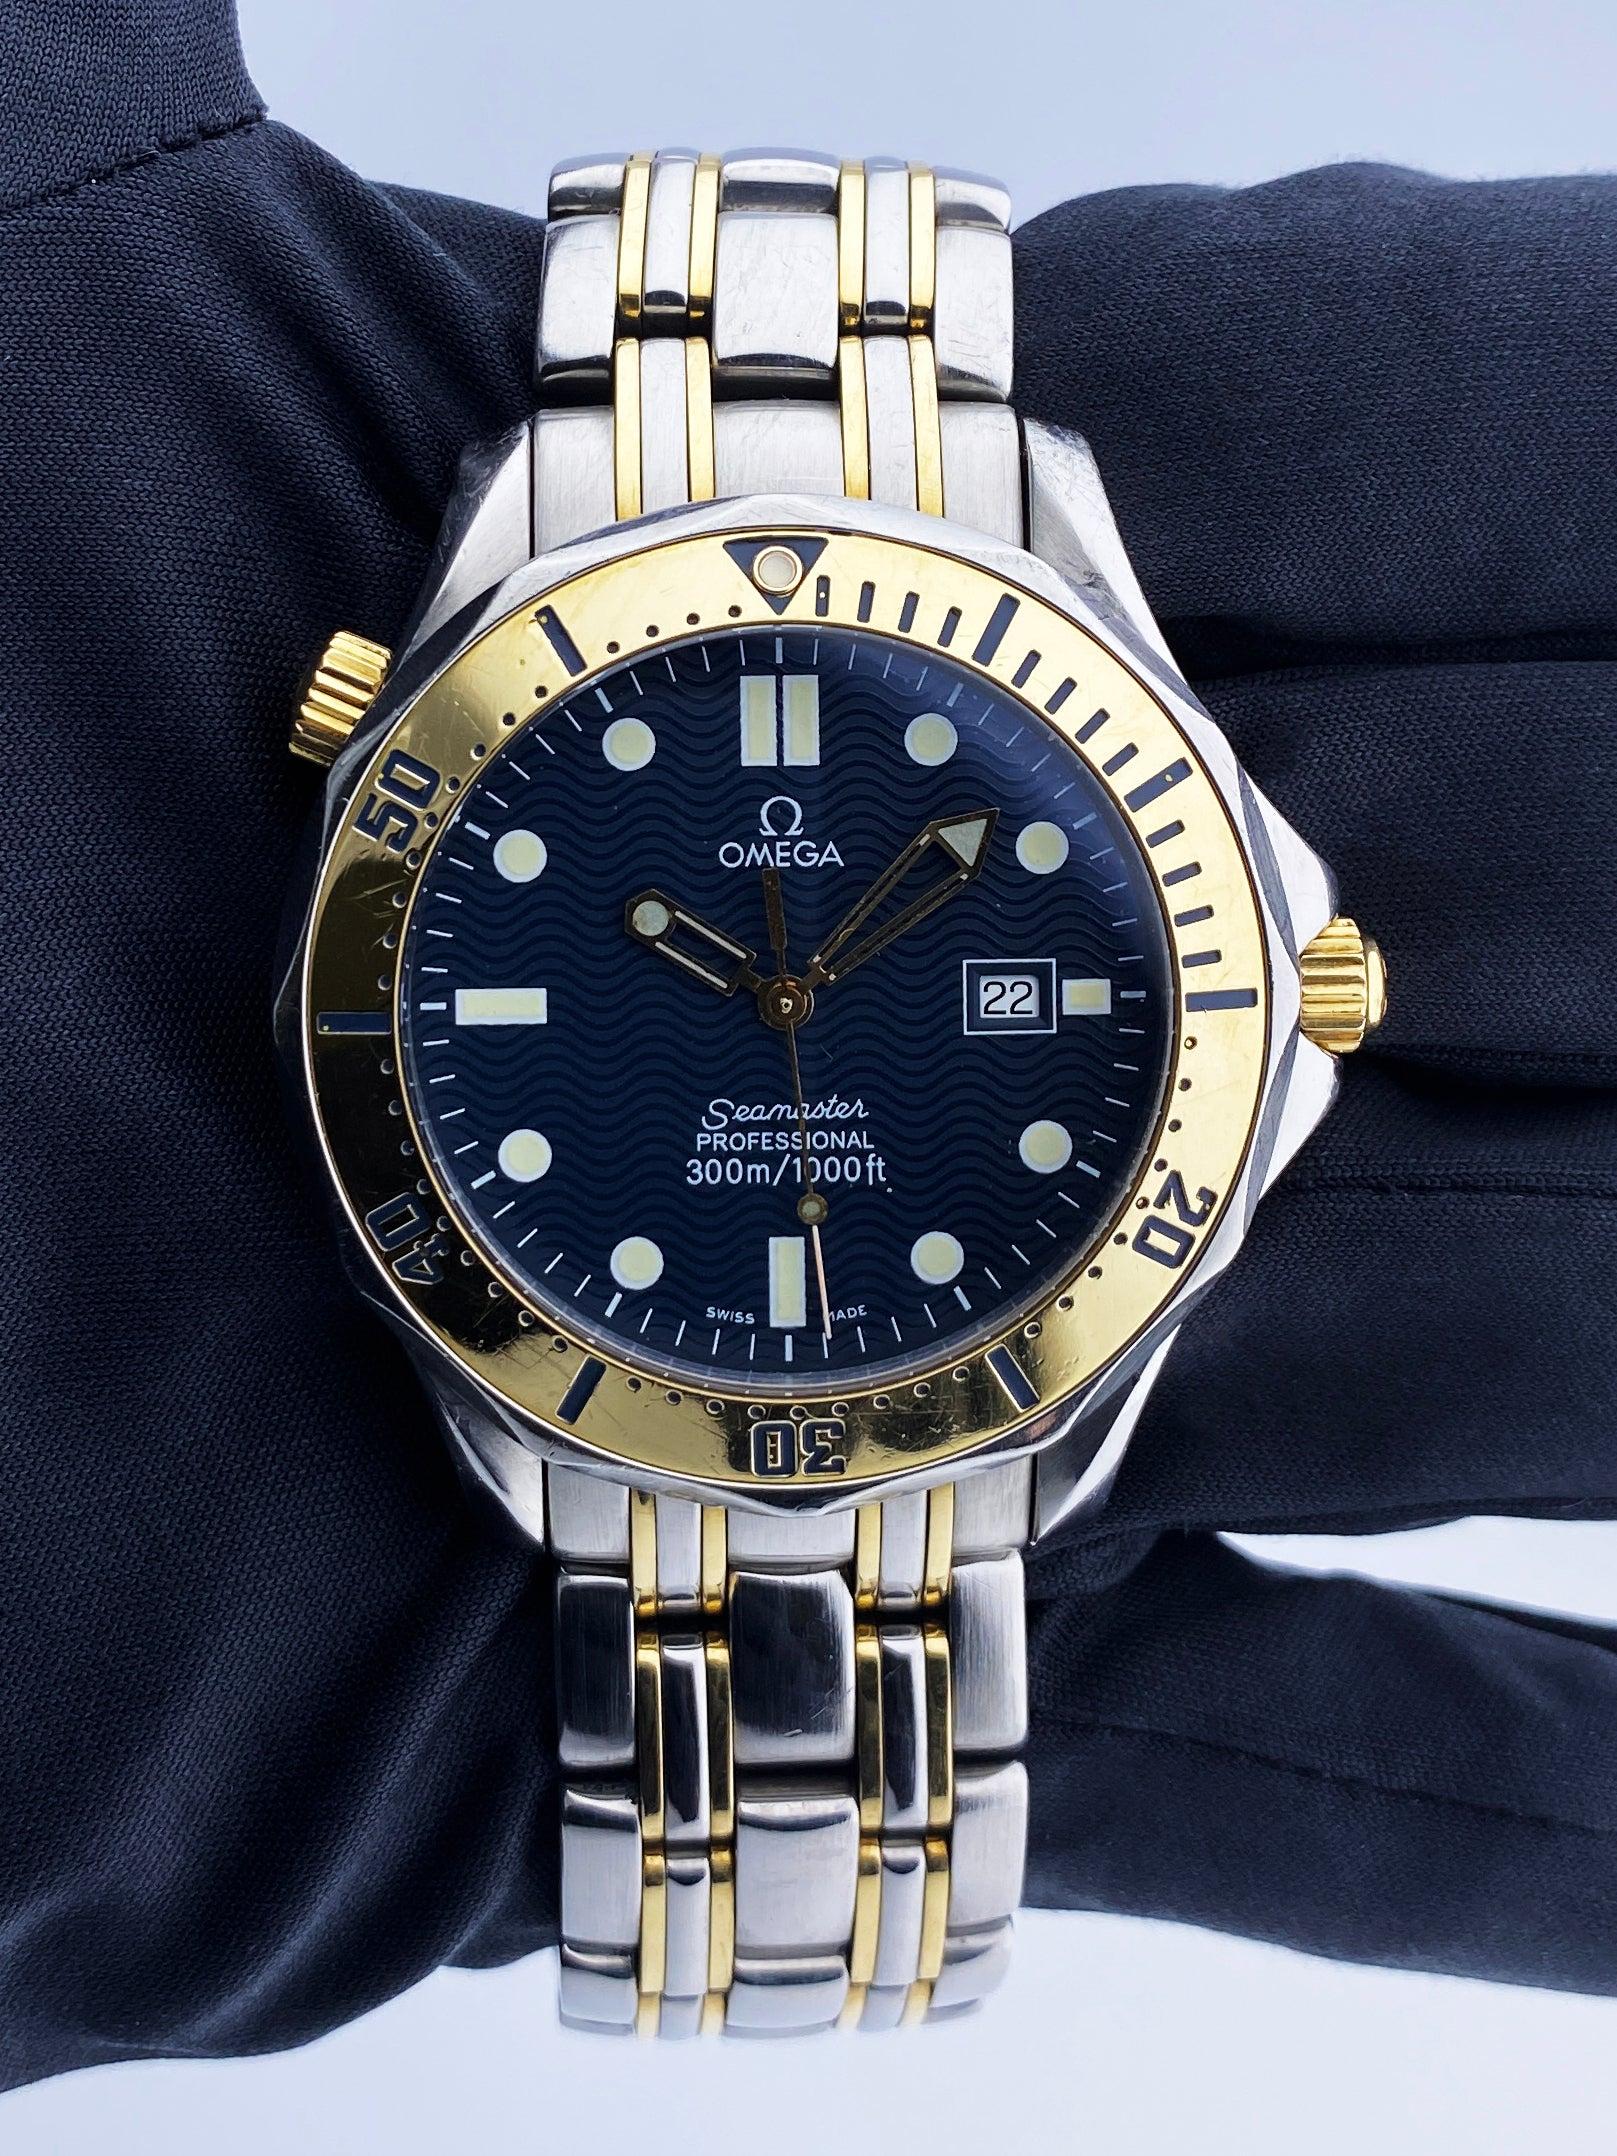 Omega Seamaster Mens Watch. 41mm stainless steel case. Stainless steel unidirectional rotating bezel with 18K yellow gold insert. Blue wave dial with luminous gold hands and luminous dot hour markers. Minute markers on the outer dial. Date display